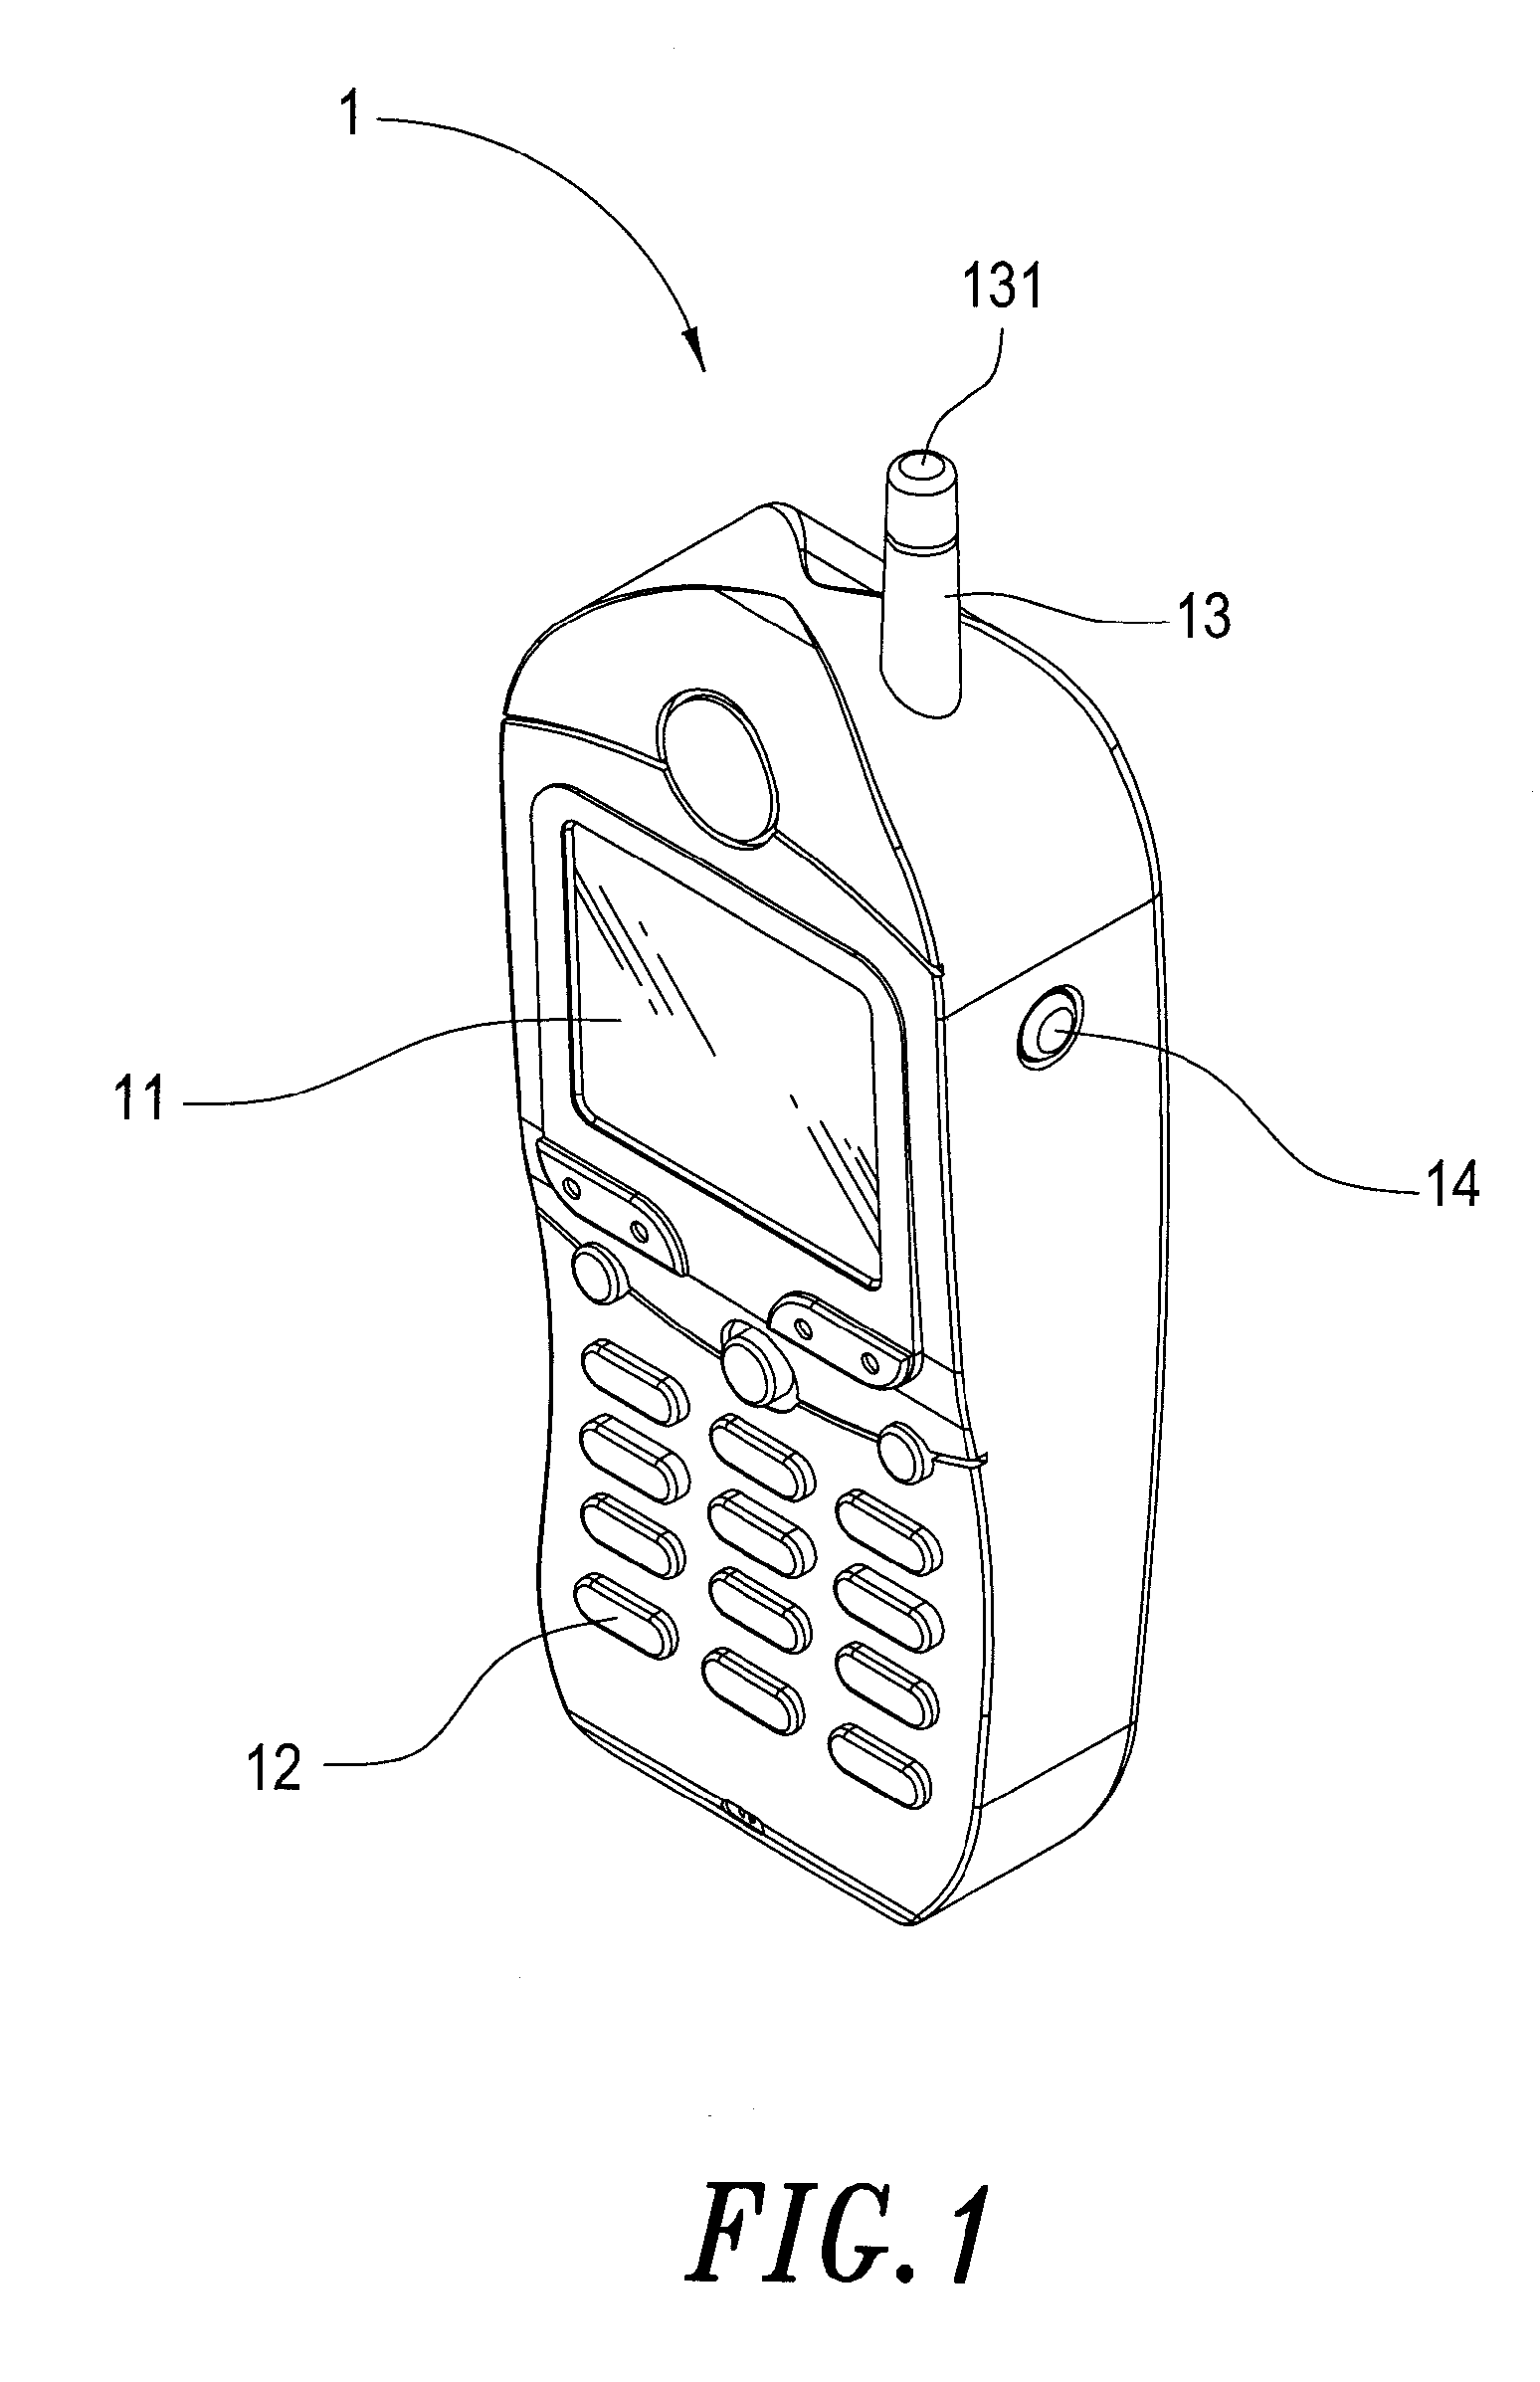 Mobile communication device provided with an ear temperature sensor